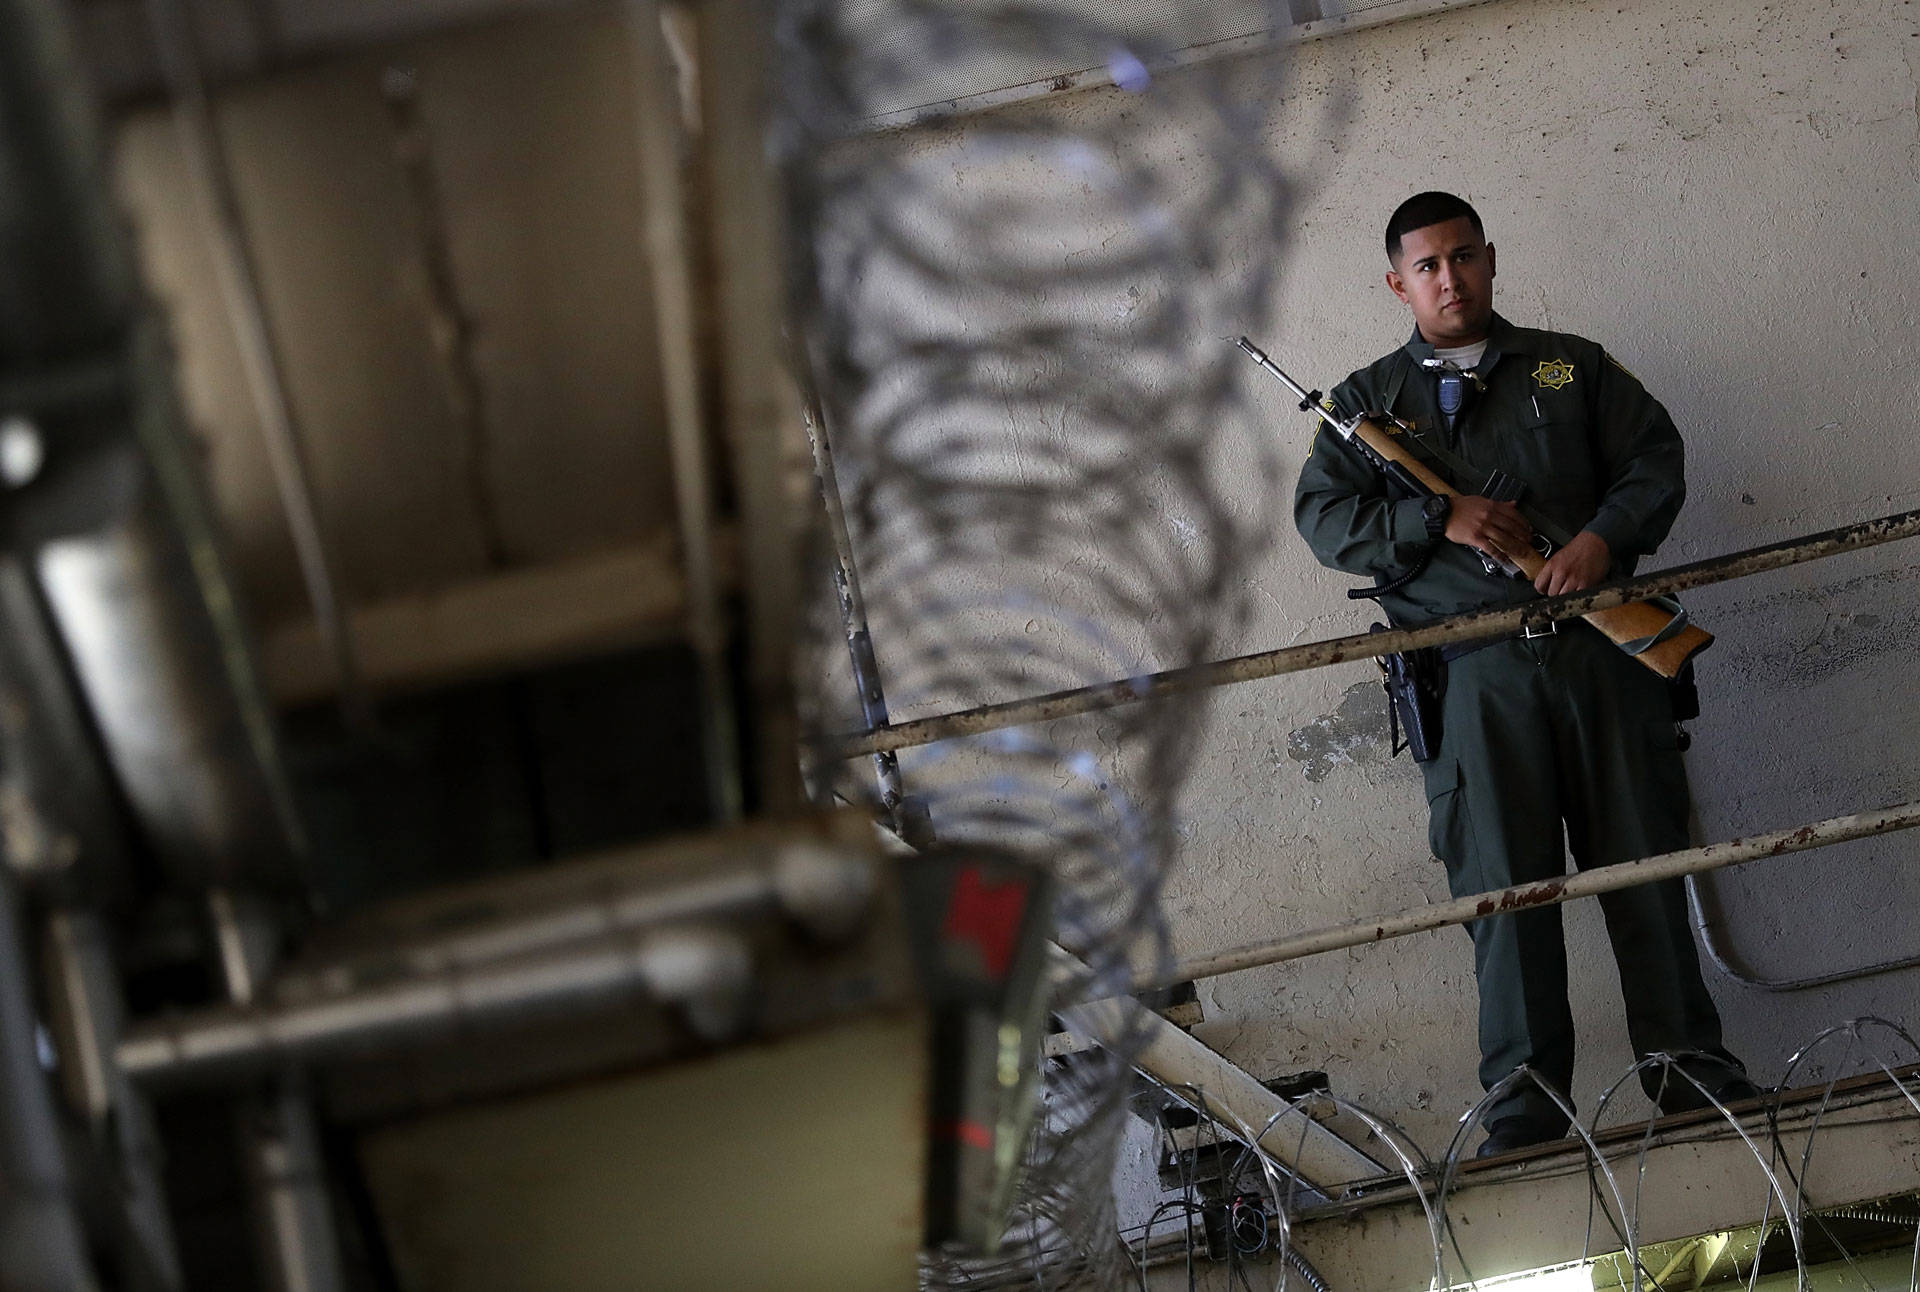 An armed California Department of Corrections and Rehabilitation (CDCR) officer stands guard at San Quentin State Prison in 2016. Justin Sullivan/Getty Images